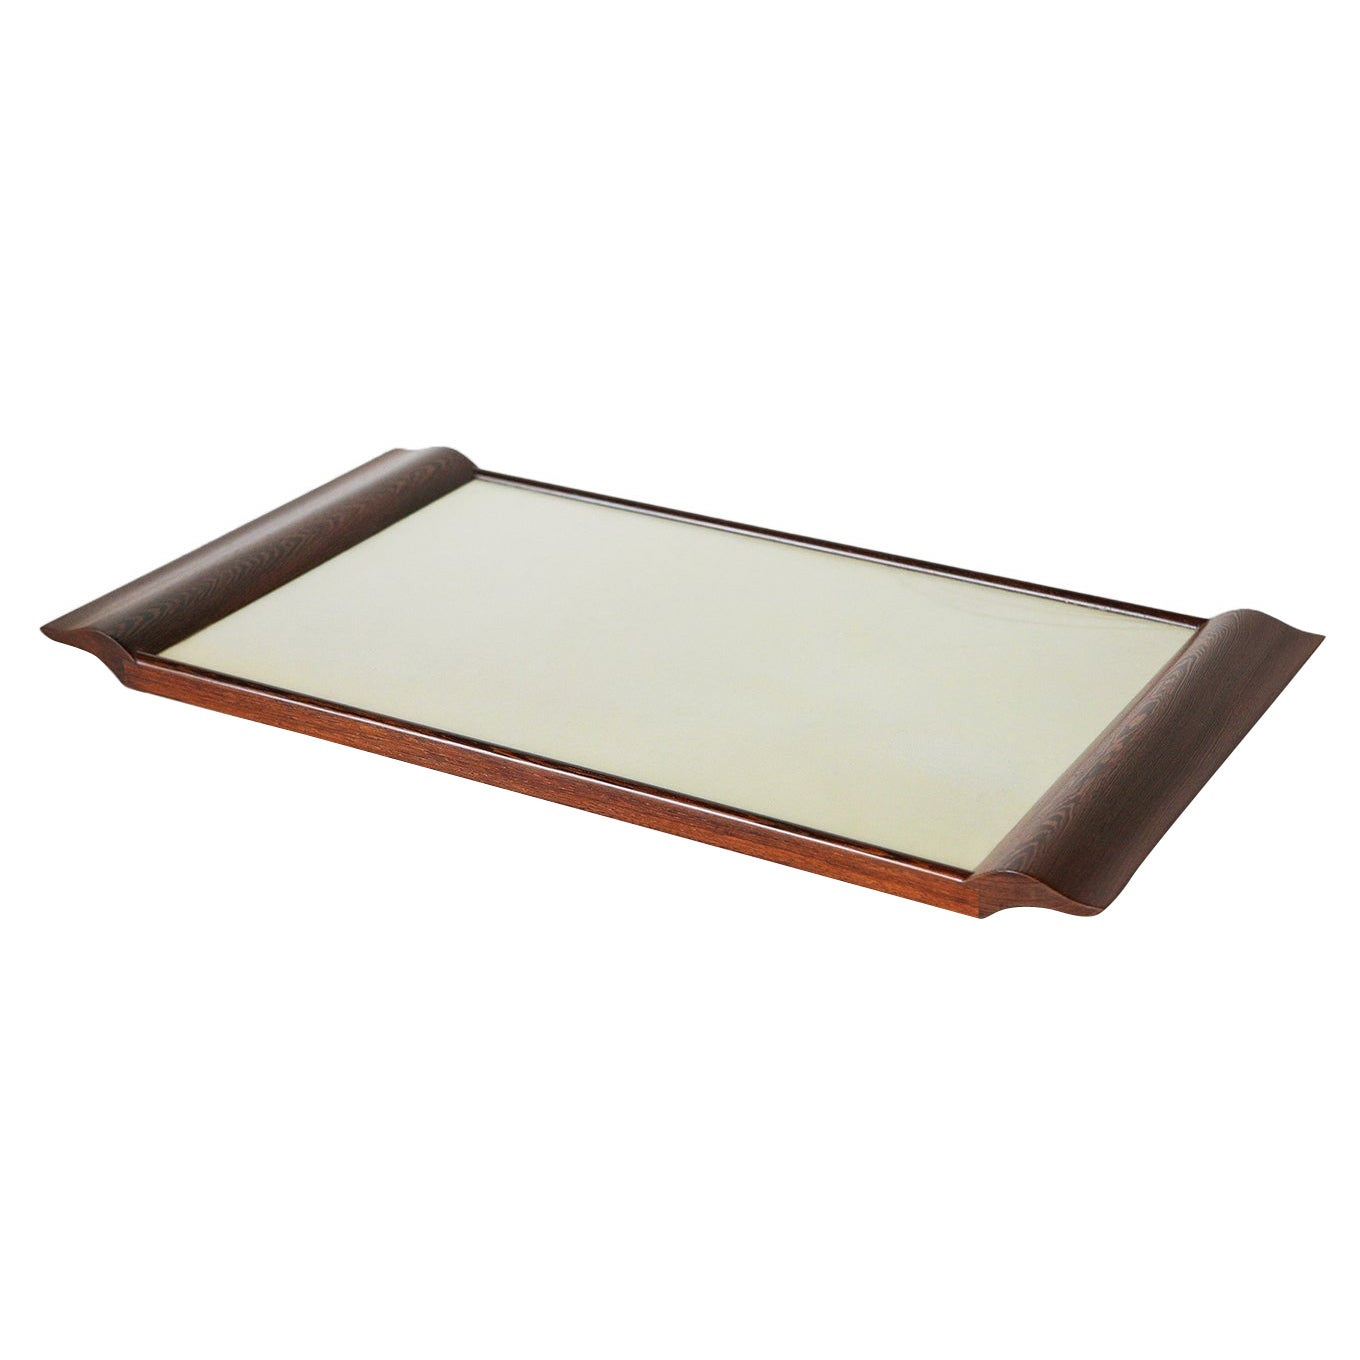 Parchment Wing Tray, Large by Alexander Lamont